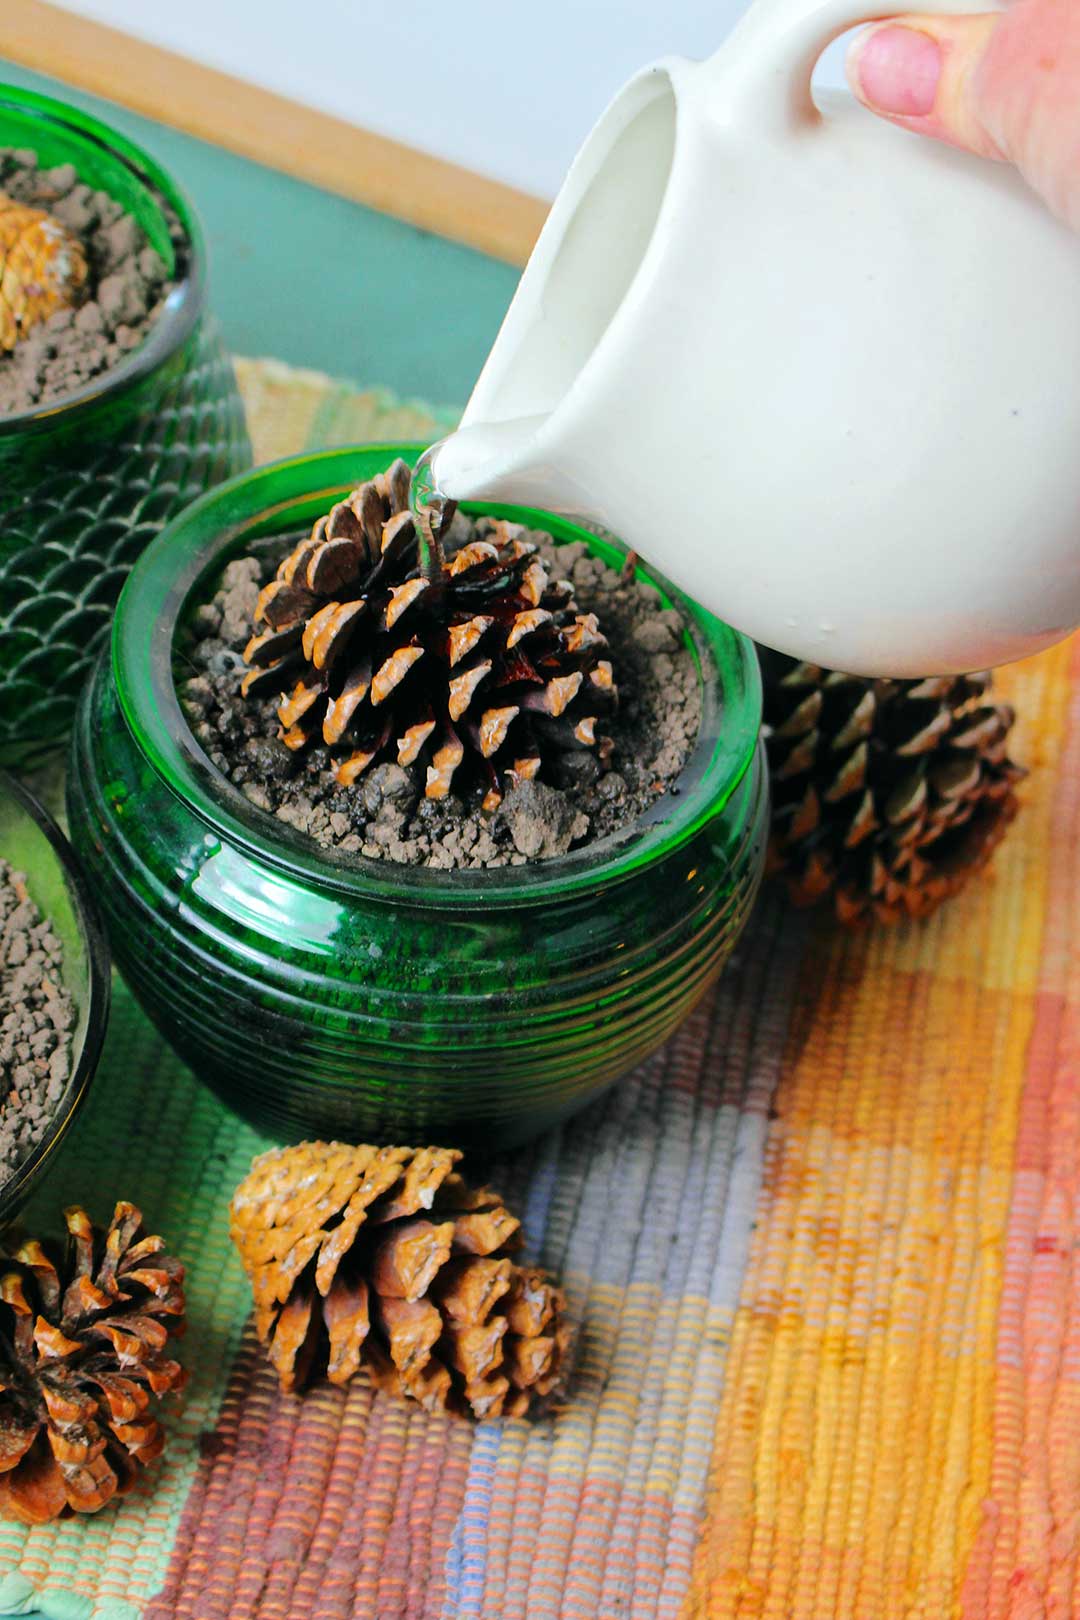 Hand pouring water from a small white creamer container on to pinecone resting on dirt in green pot.
